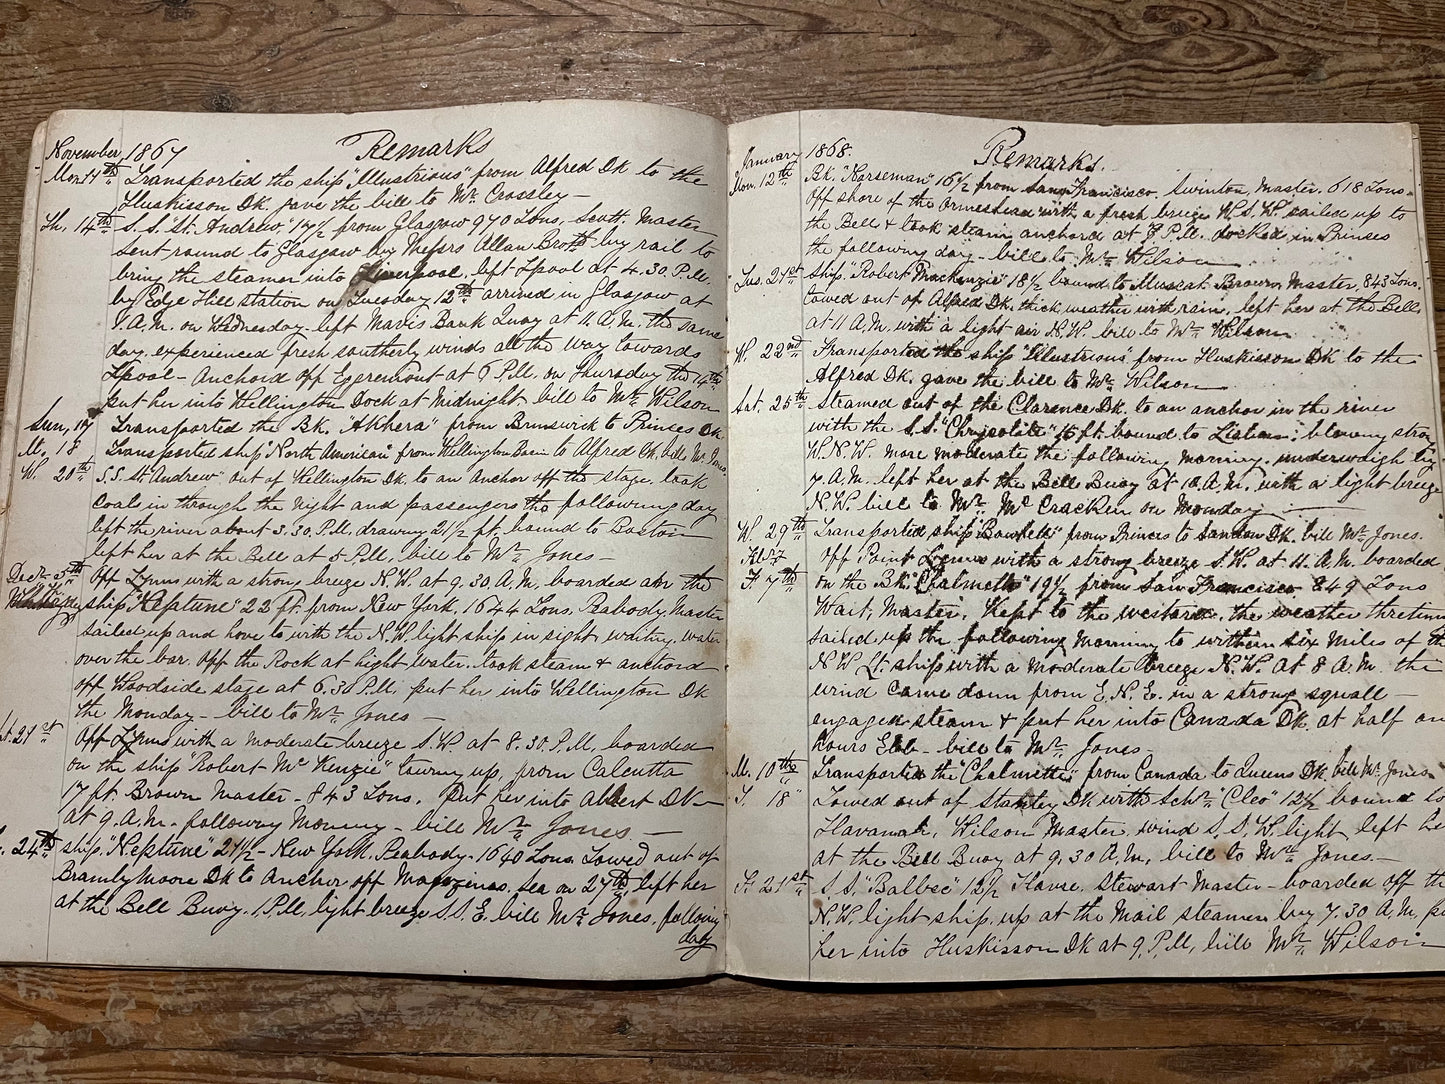 Journal and ships log written by the Liverpool seaman, John Gould, from 1852 to 1868. Includes voyages to New Orleans and San Francisco, and a fascinating list of ships seen in Liverpool harbour from 1867-8.